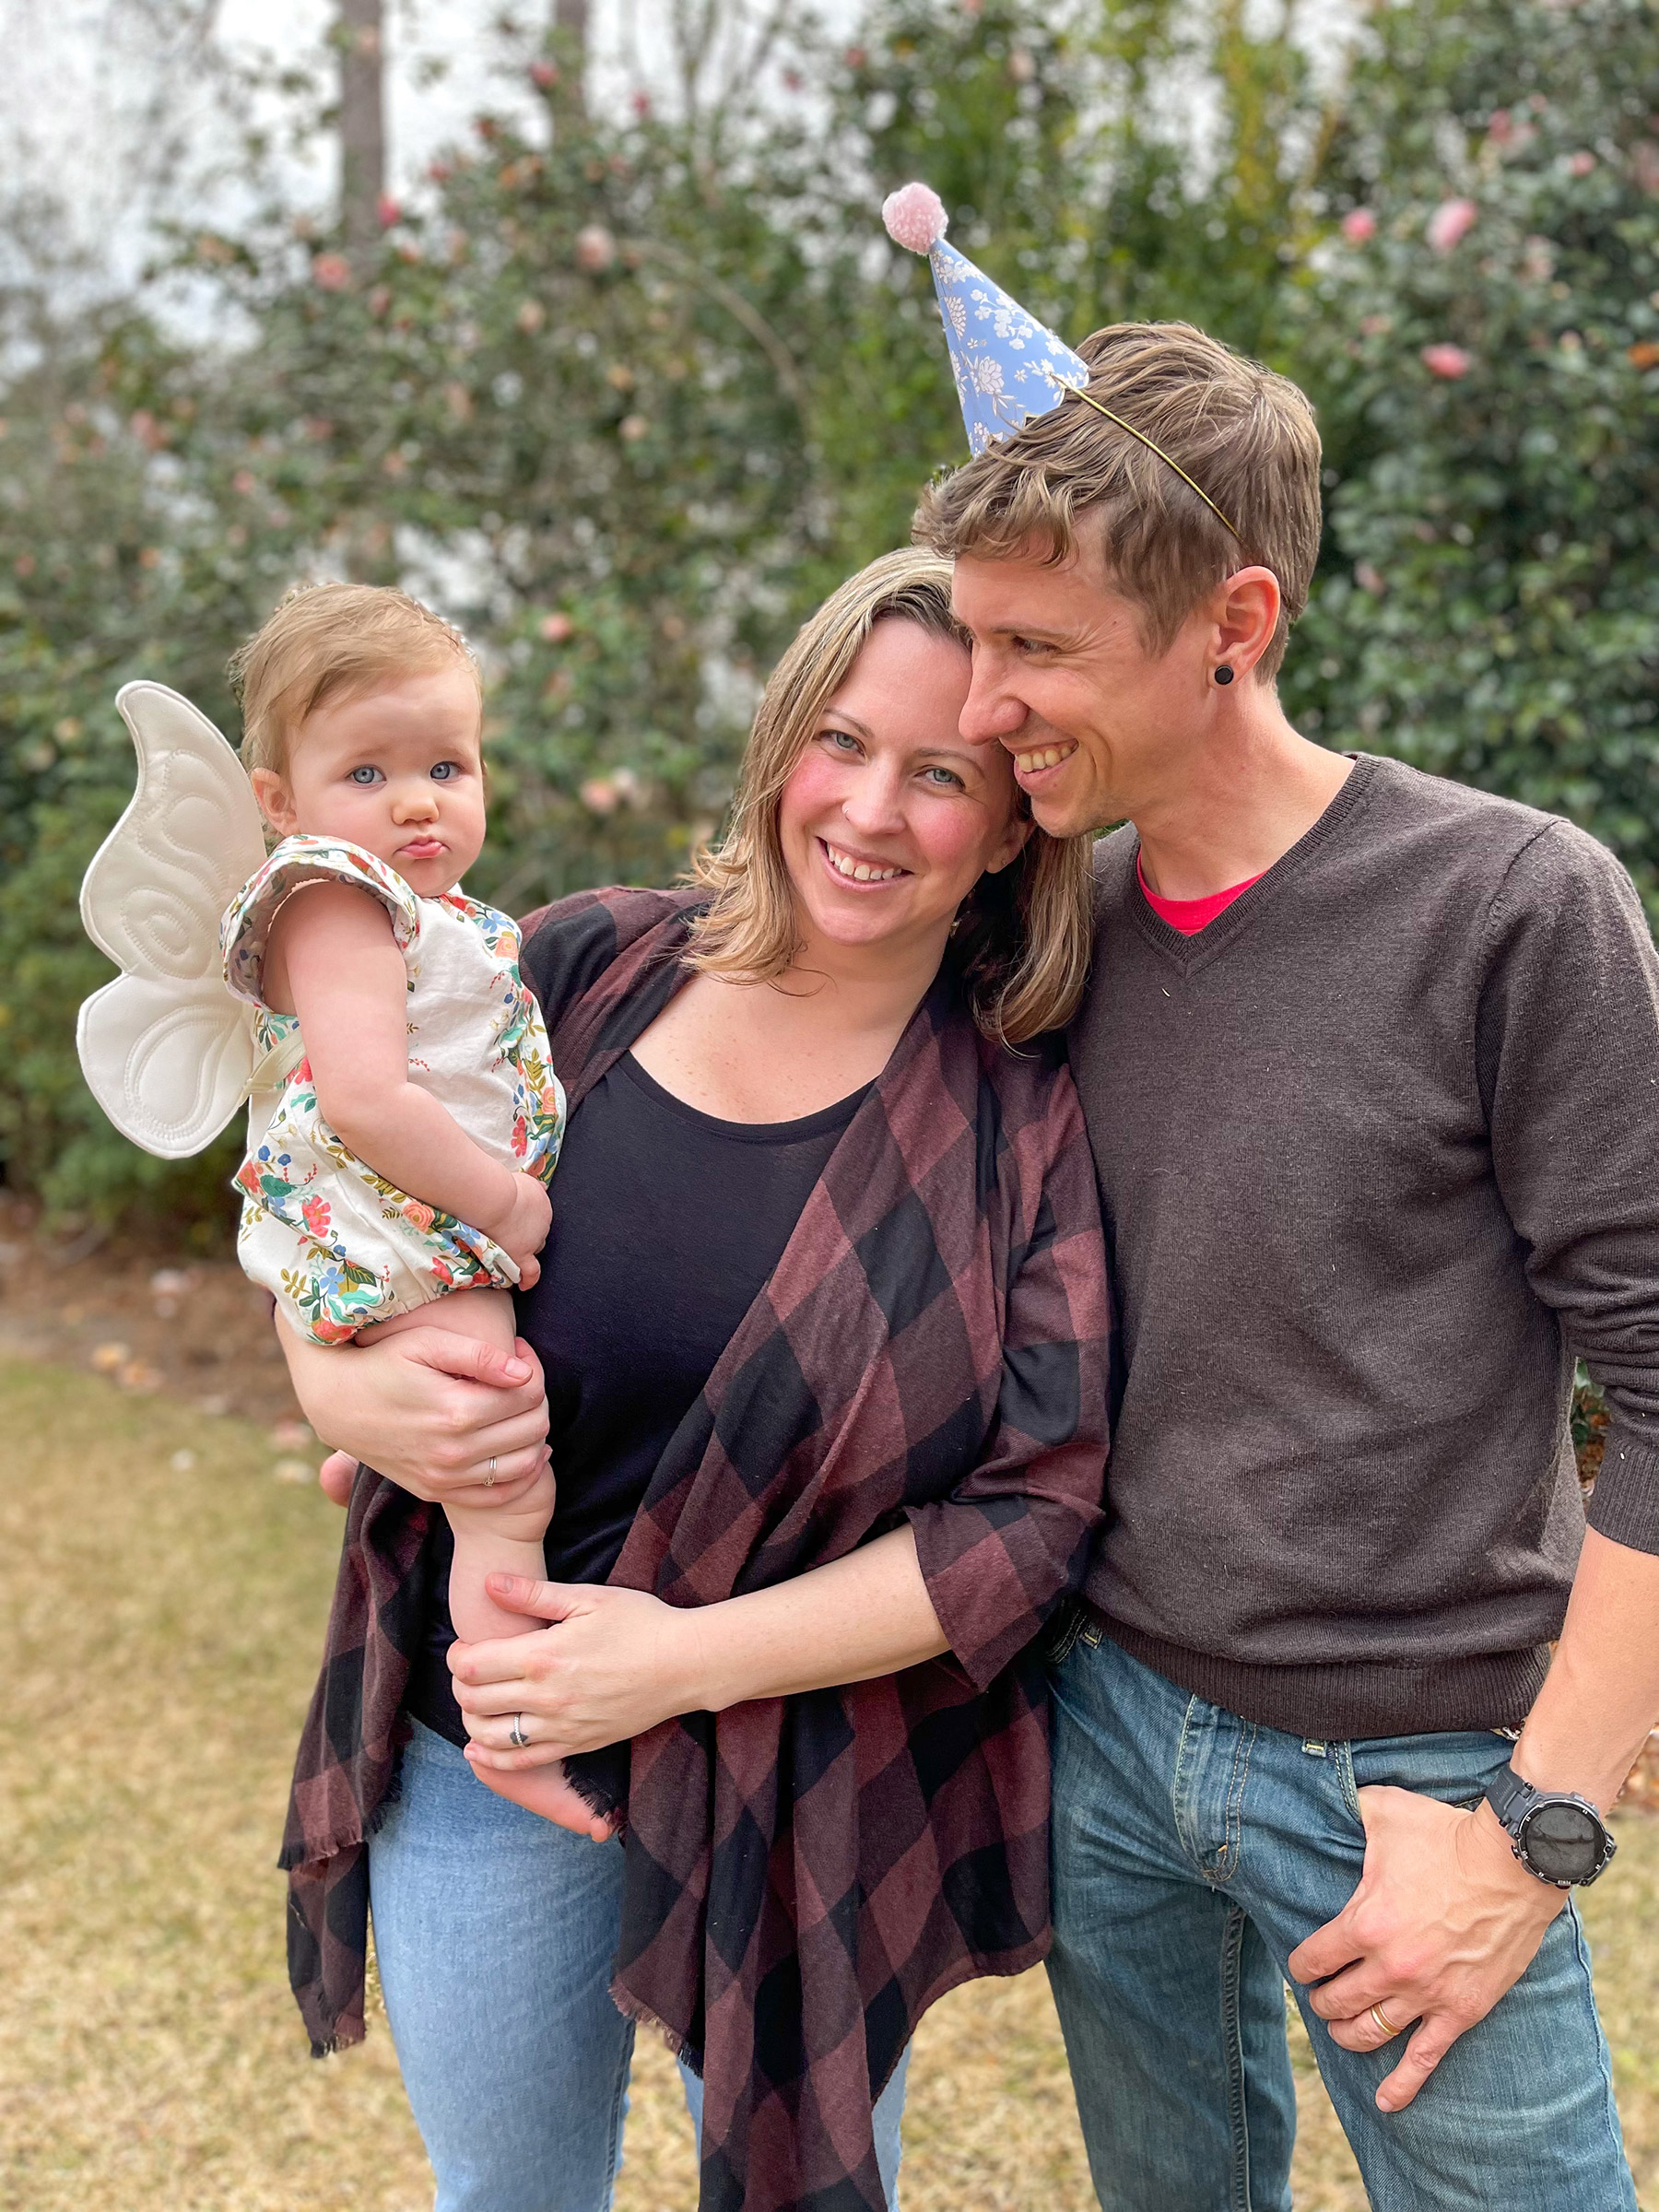 The author with his partner and daughter in Dothan, Alabama, in February 2022. (Courtesy Karie Fugett)